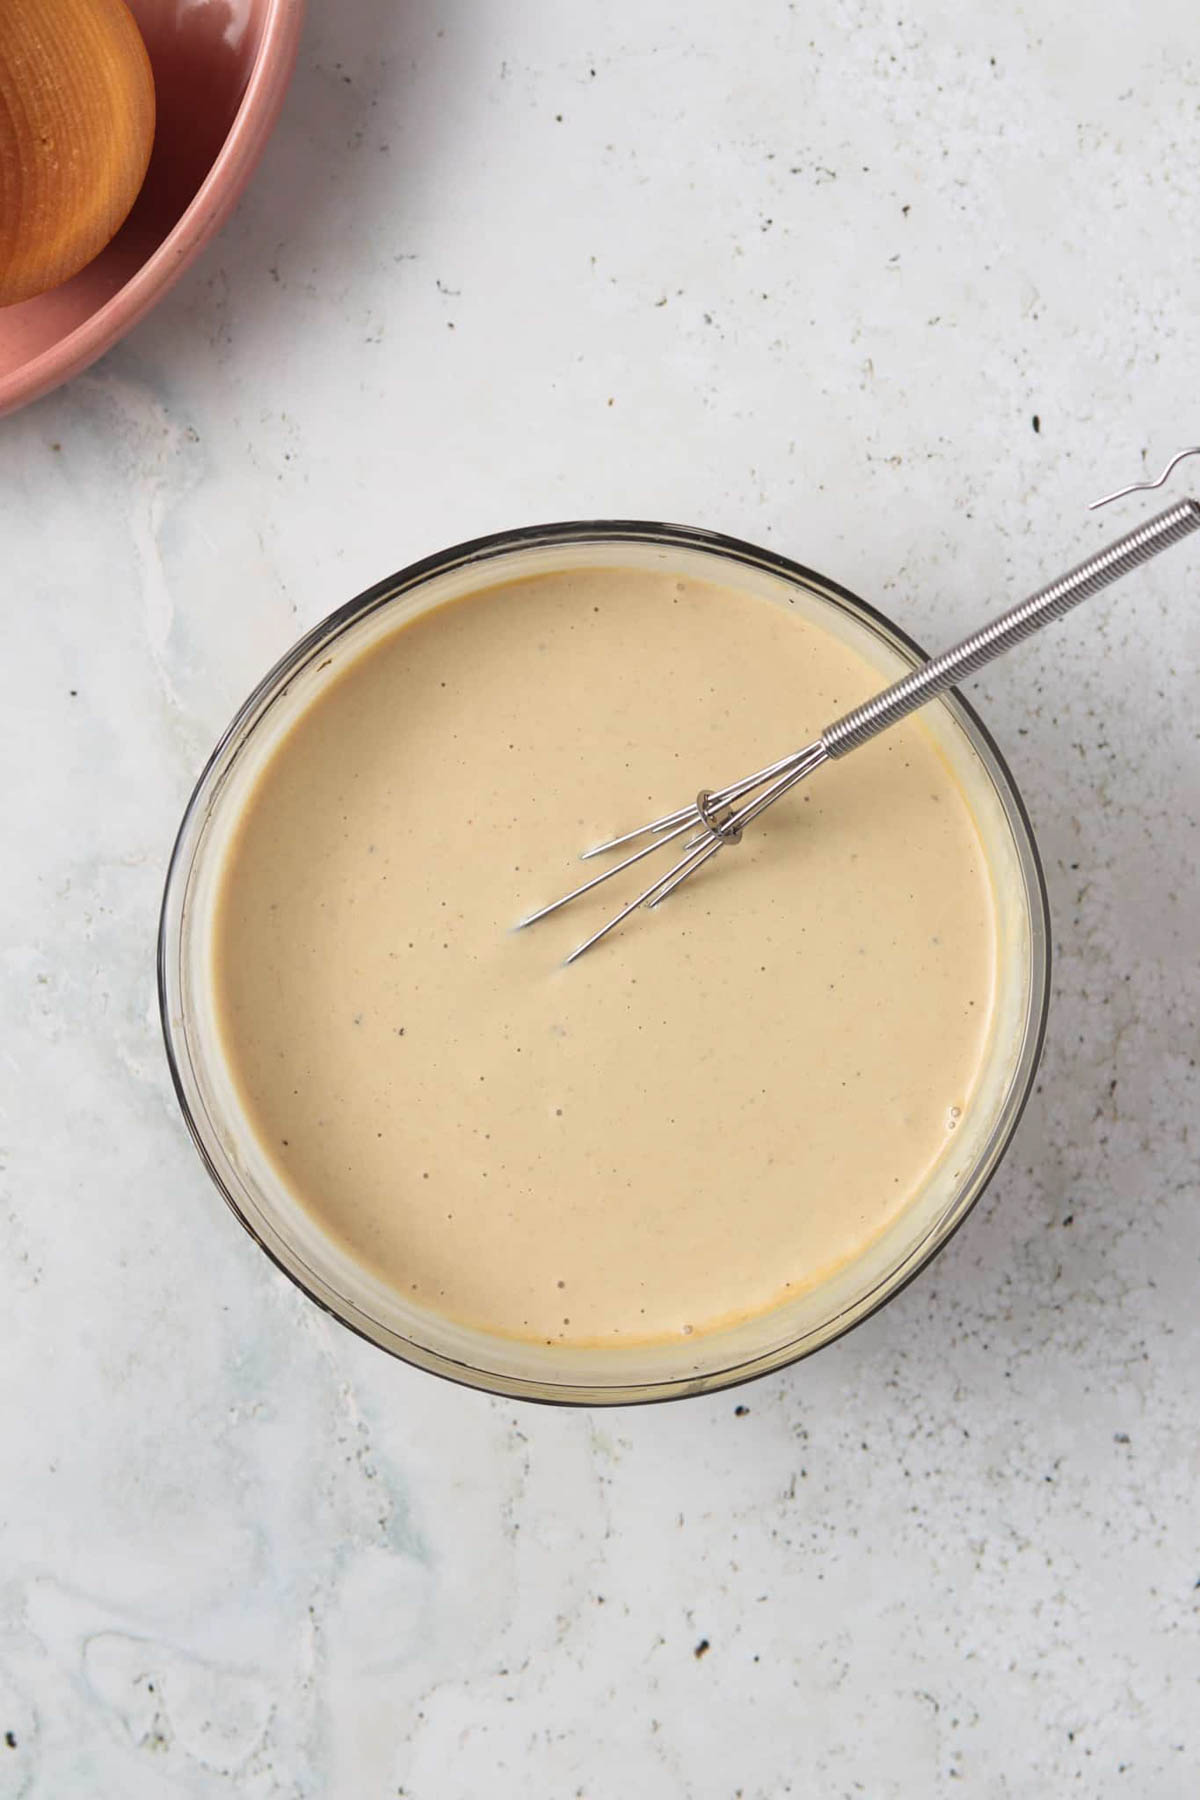 Whole 30 caesar dressing ingredients mixed together with a whisk in a small glass mixing bowl.